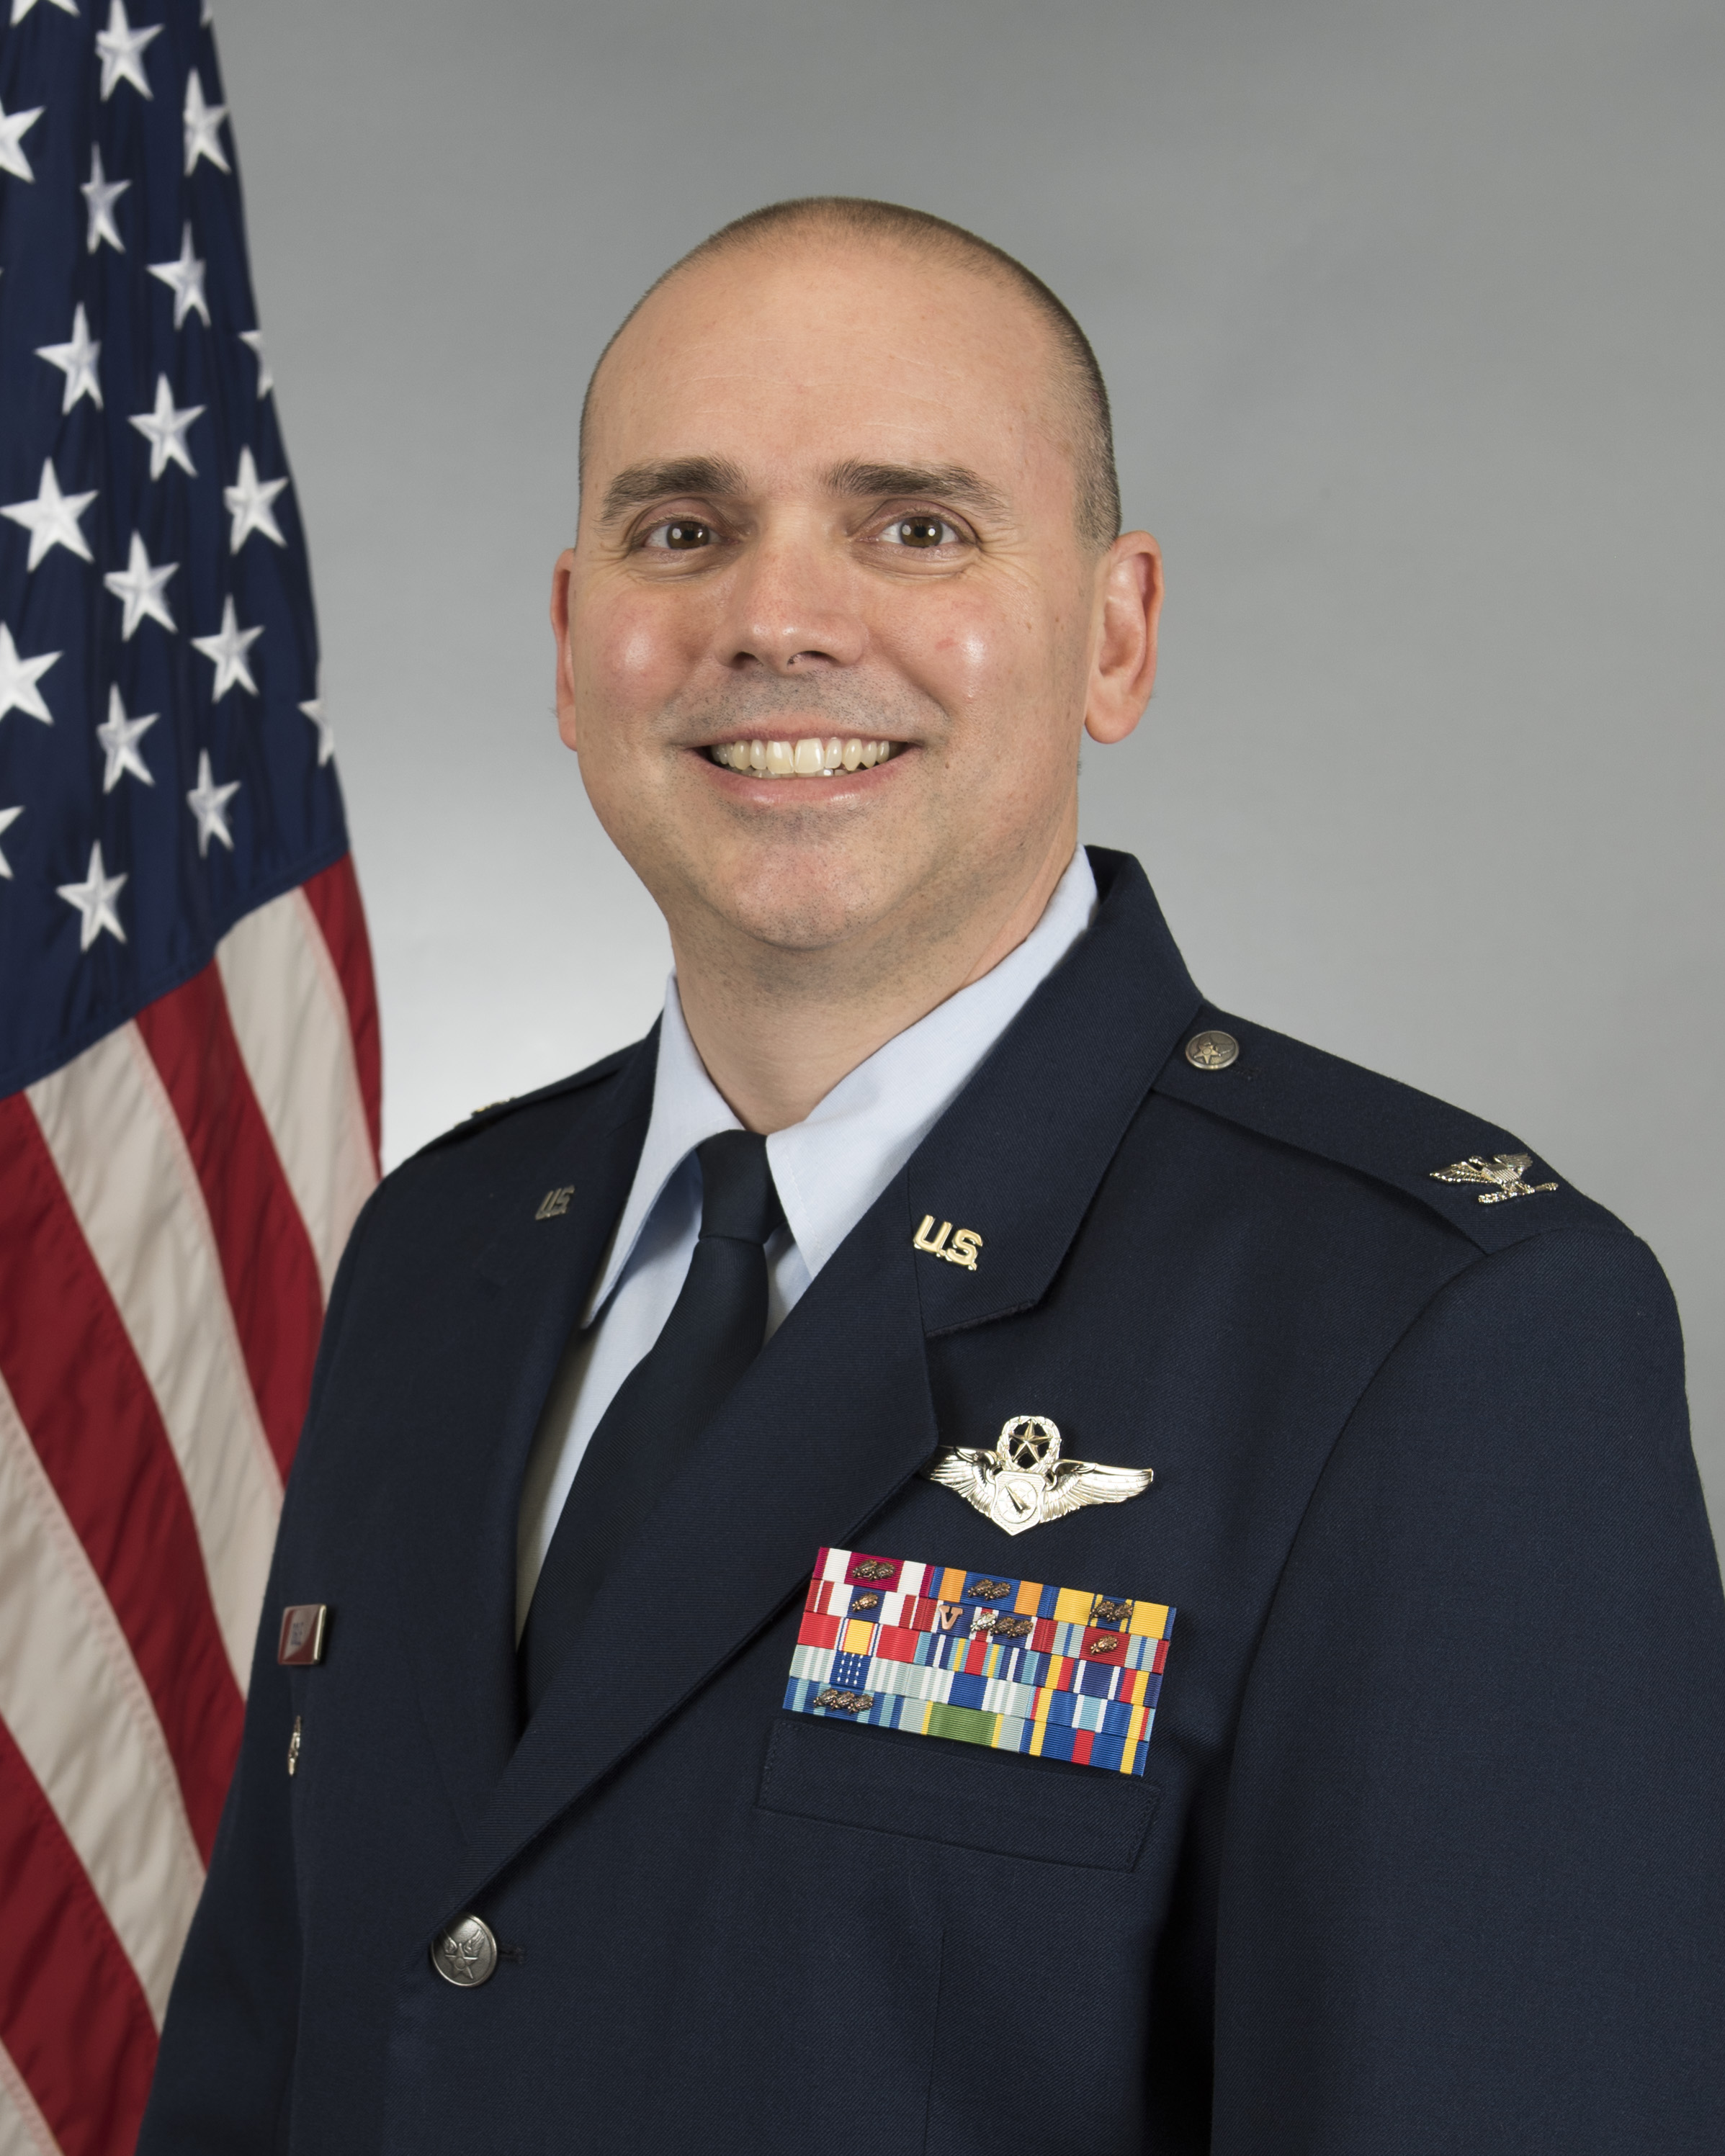 Official Photo of Col Ogle